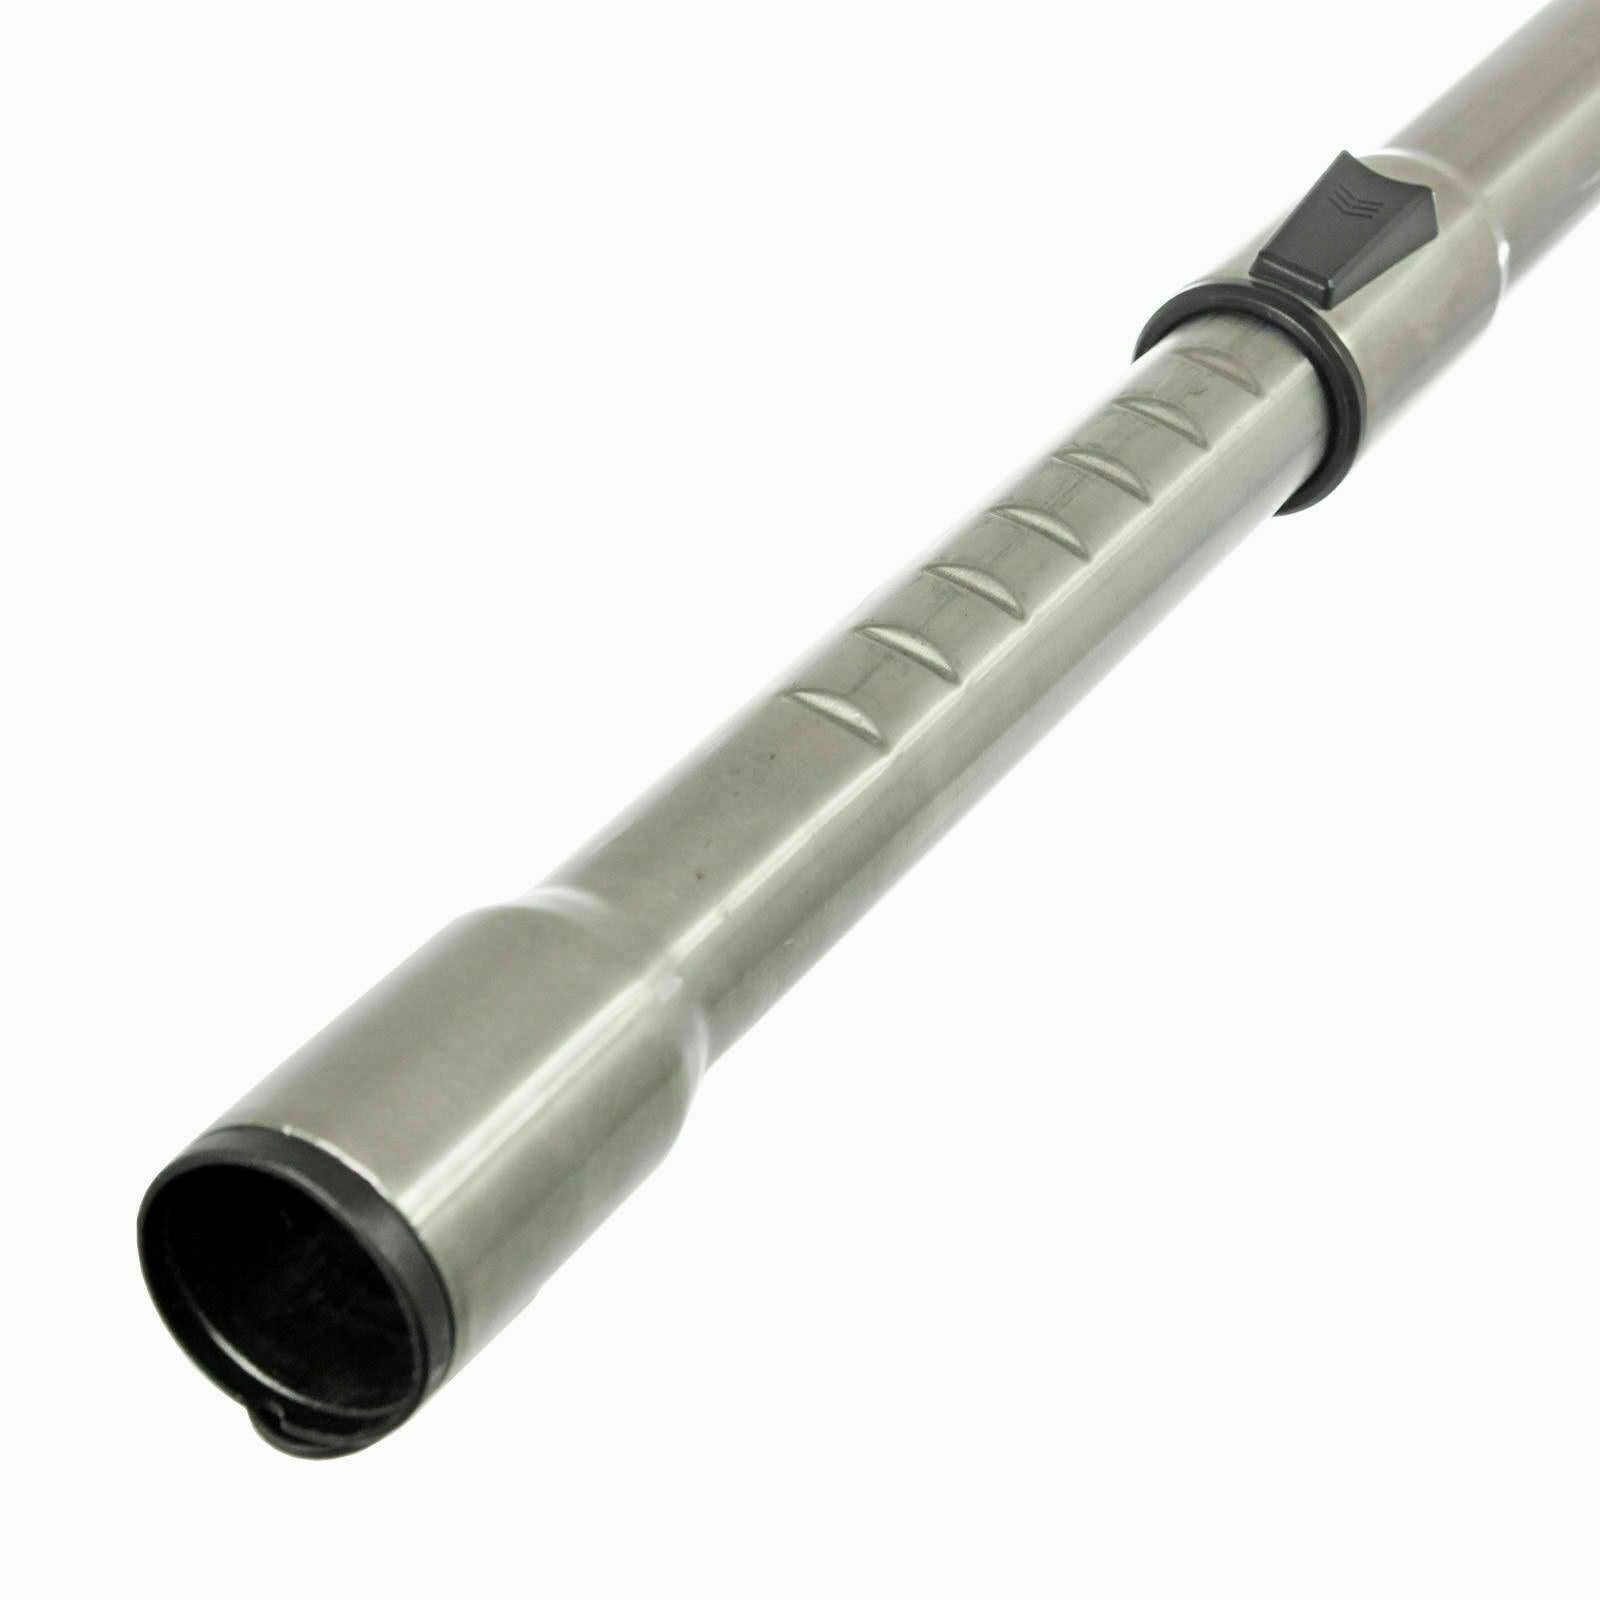 Telescopic Extension Tube Pipe Rod For Miele S5710 S5711 S5760 S5761 Sparesbarn